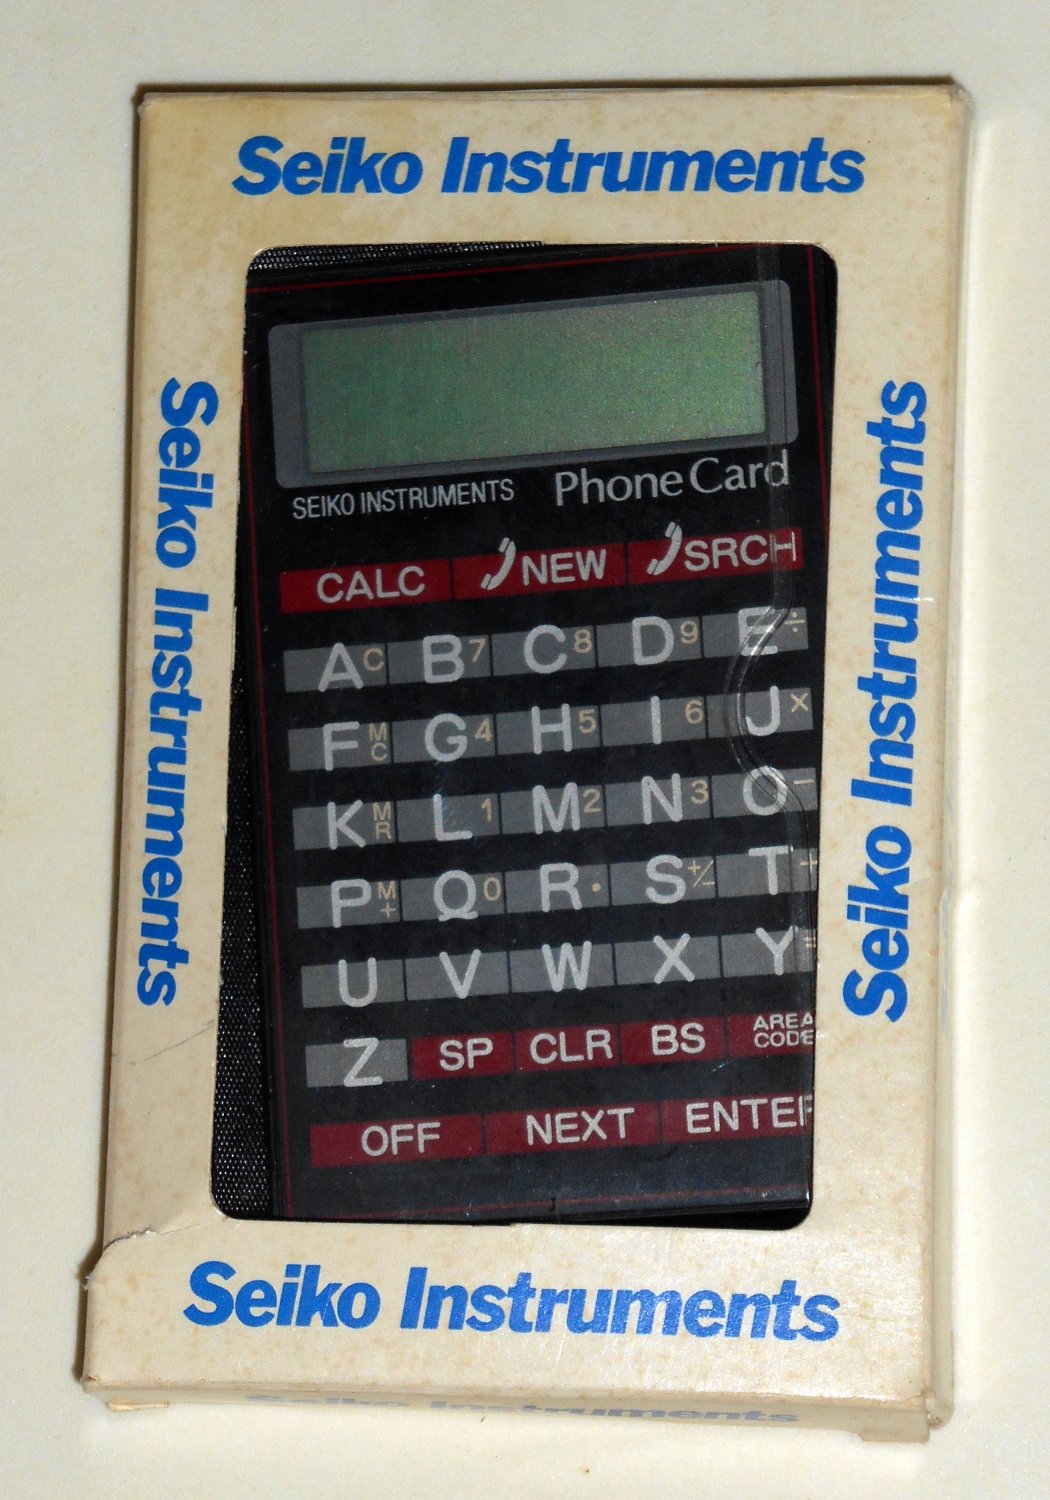 Seiko Instruments Phone Book Card DF-210 Calculator with Instructions Case Box